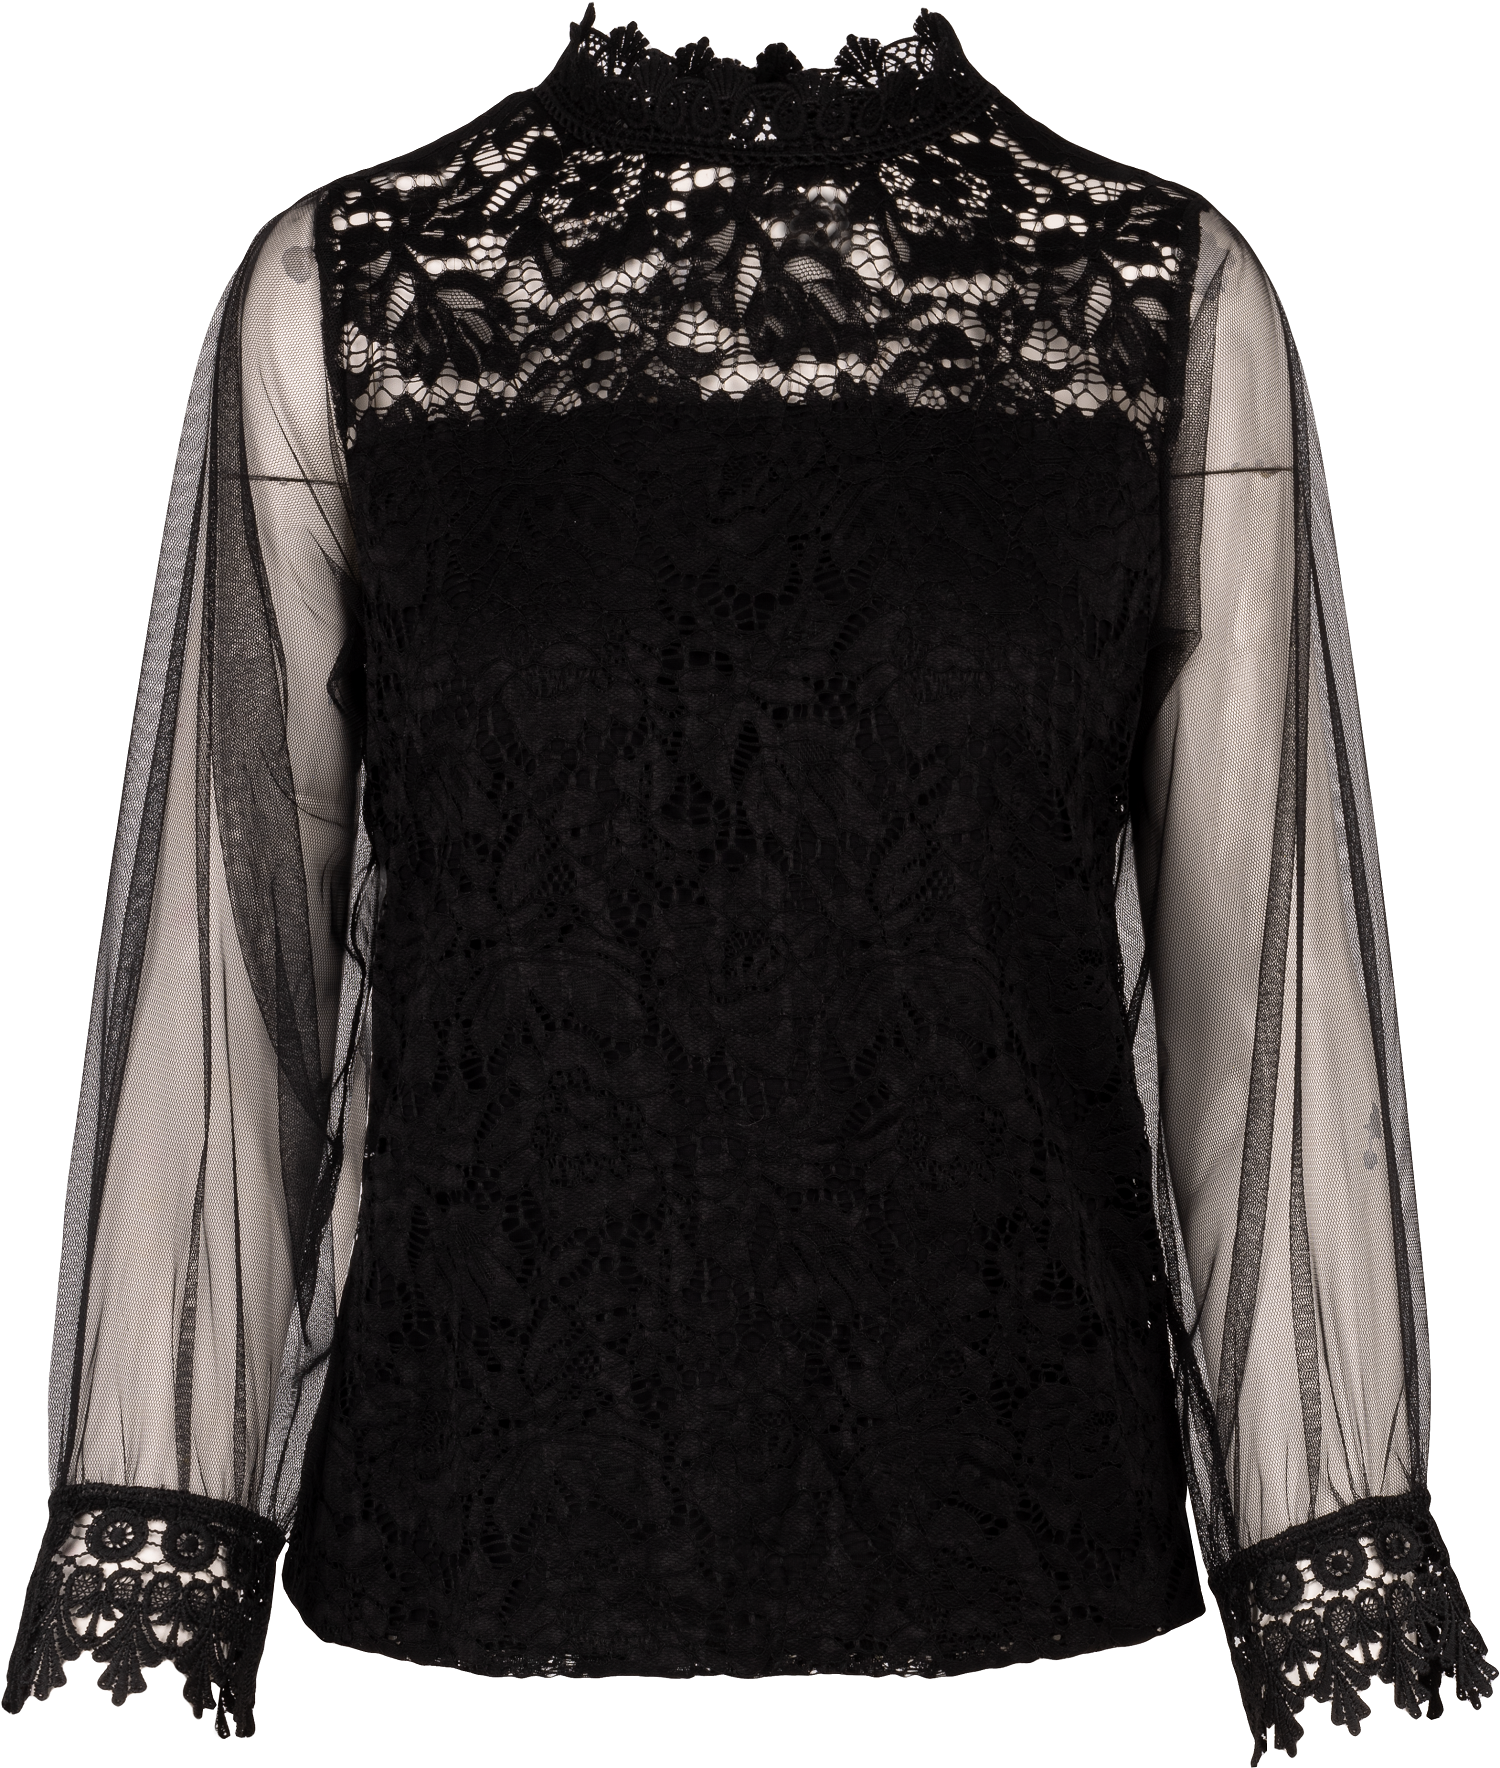 BLOUSE  M. ITALY "LACE" BLACK